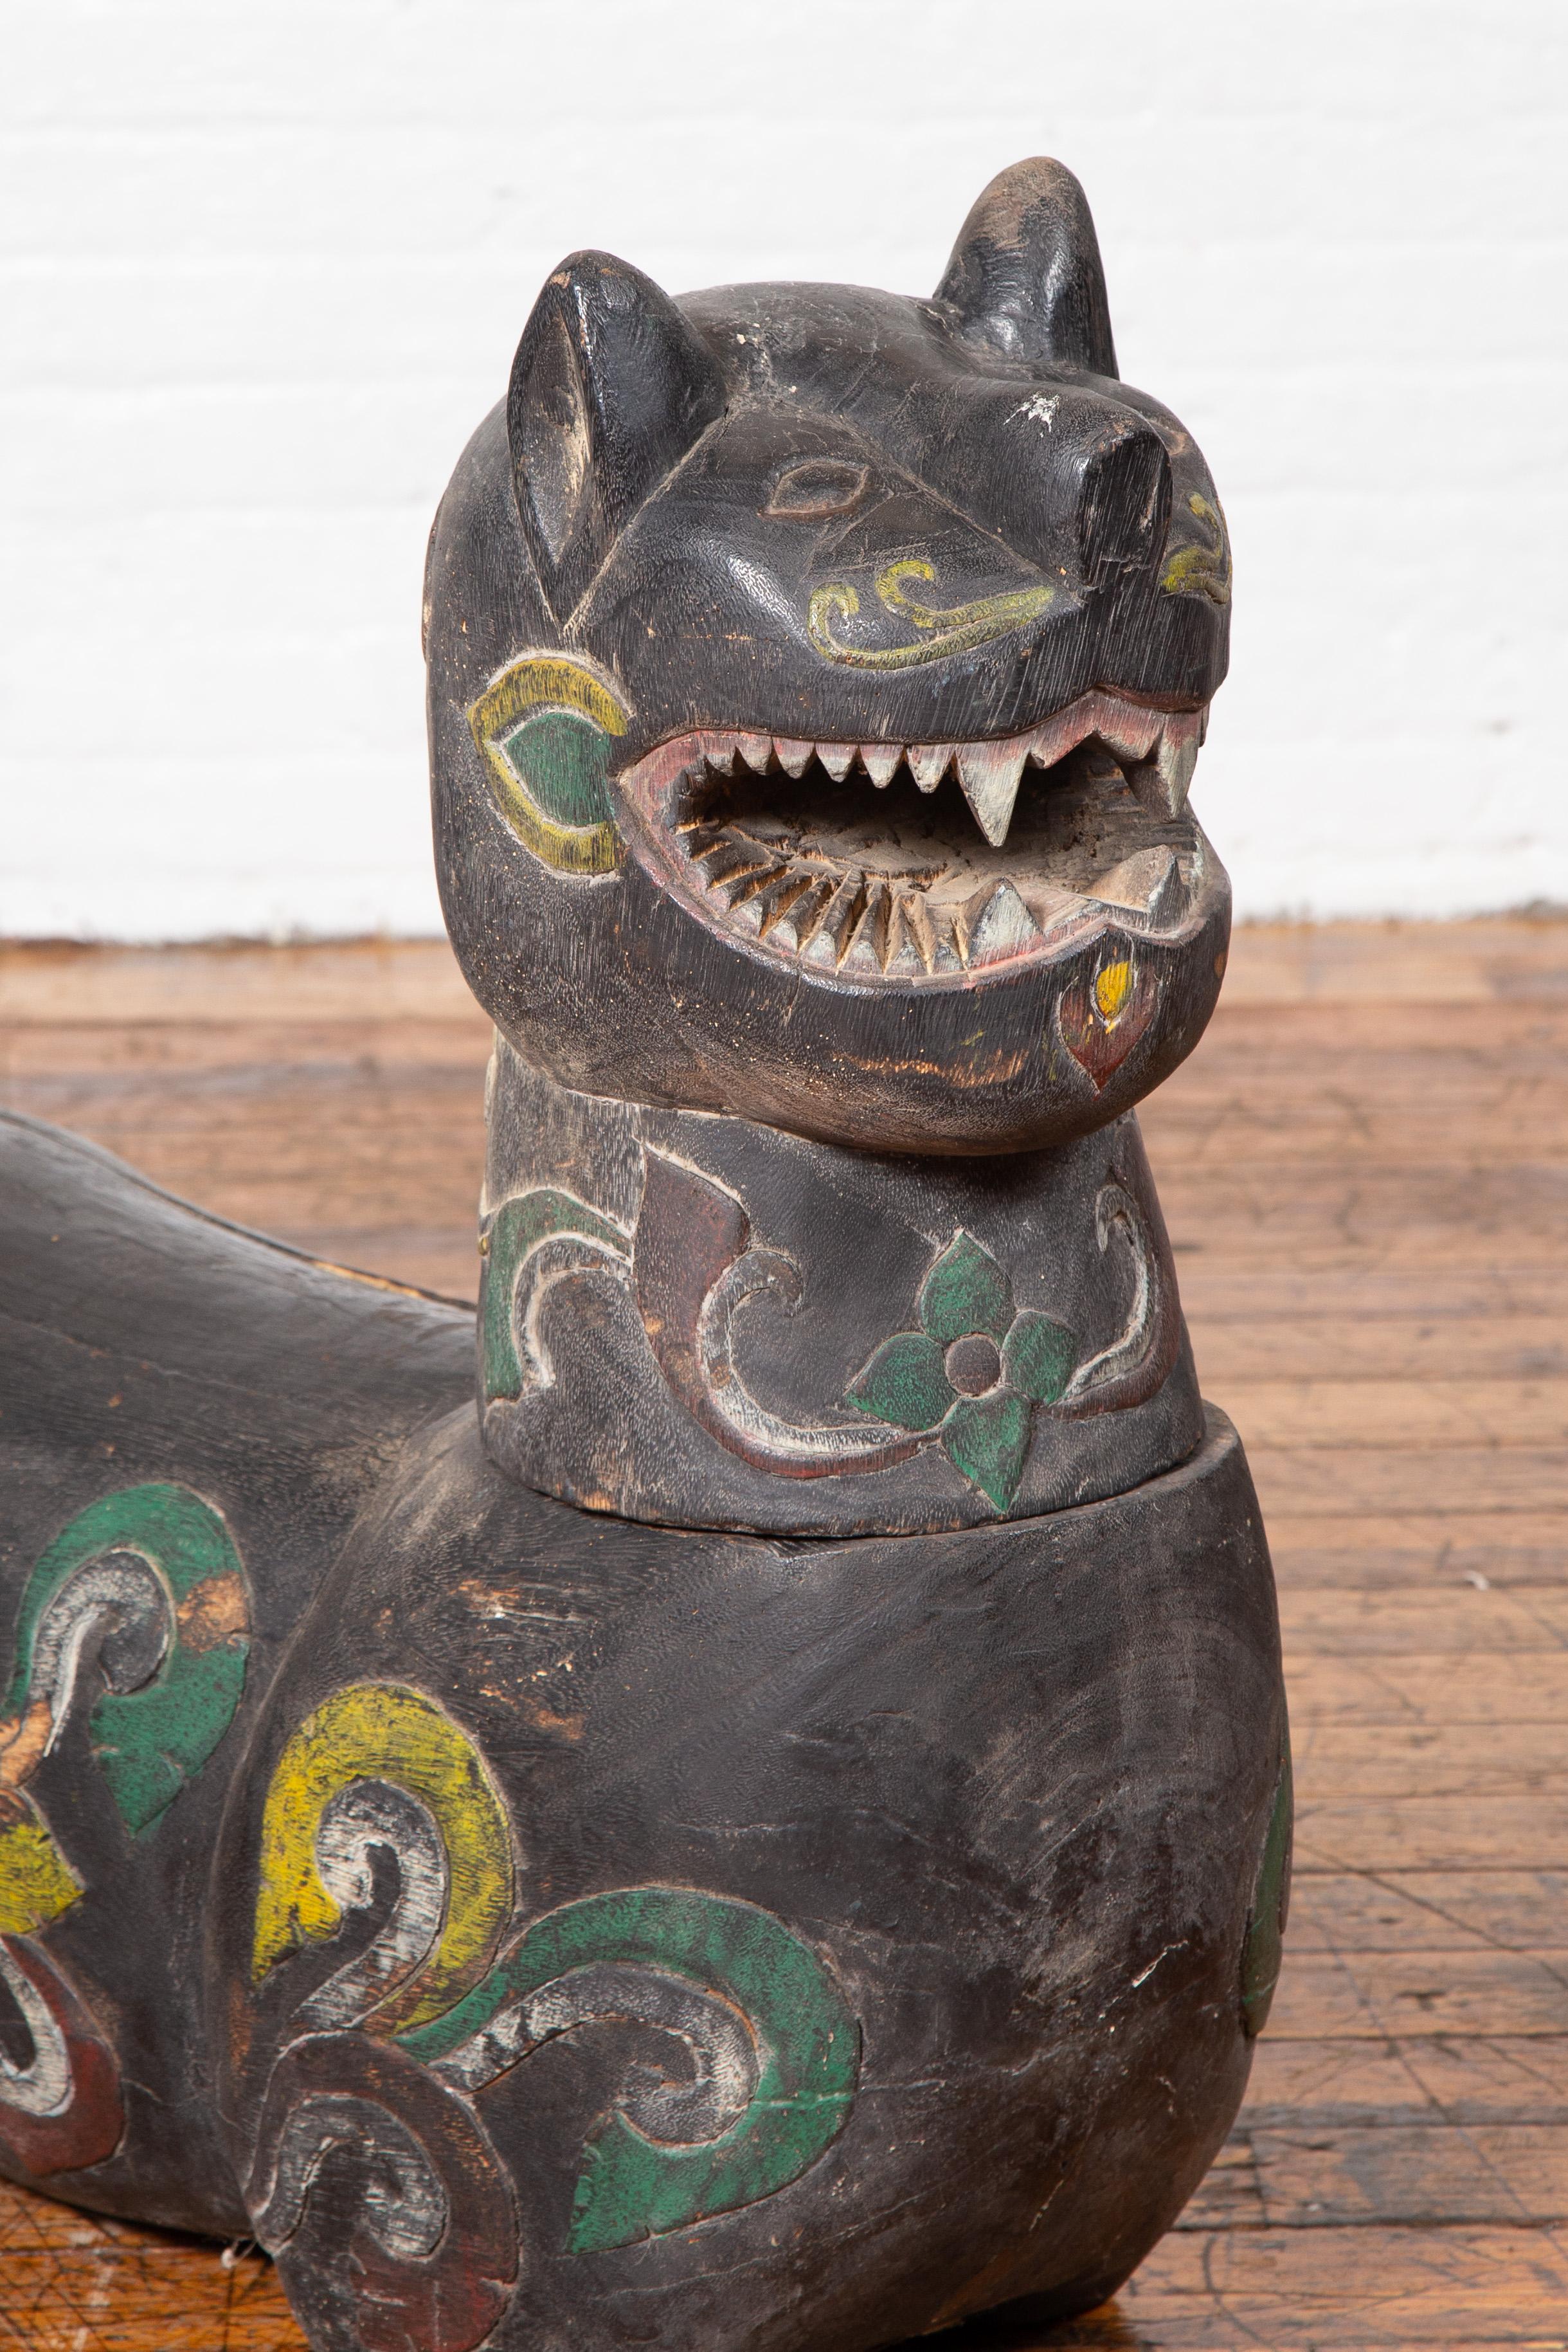 An antique Chiang Mai wood mythical guardian animal from Thailand. Carved in Chiang Mai, Northern Thailand, this mythical guardian animal attracts our attention with its striking features and polychrome finish. Made of old wood, the animal showcases